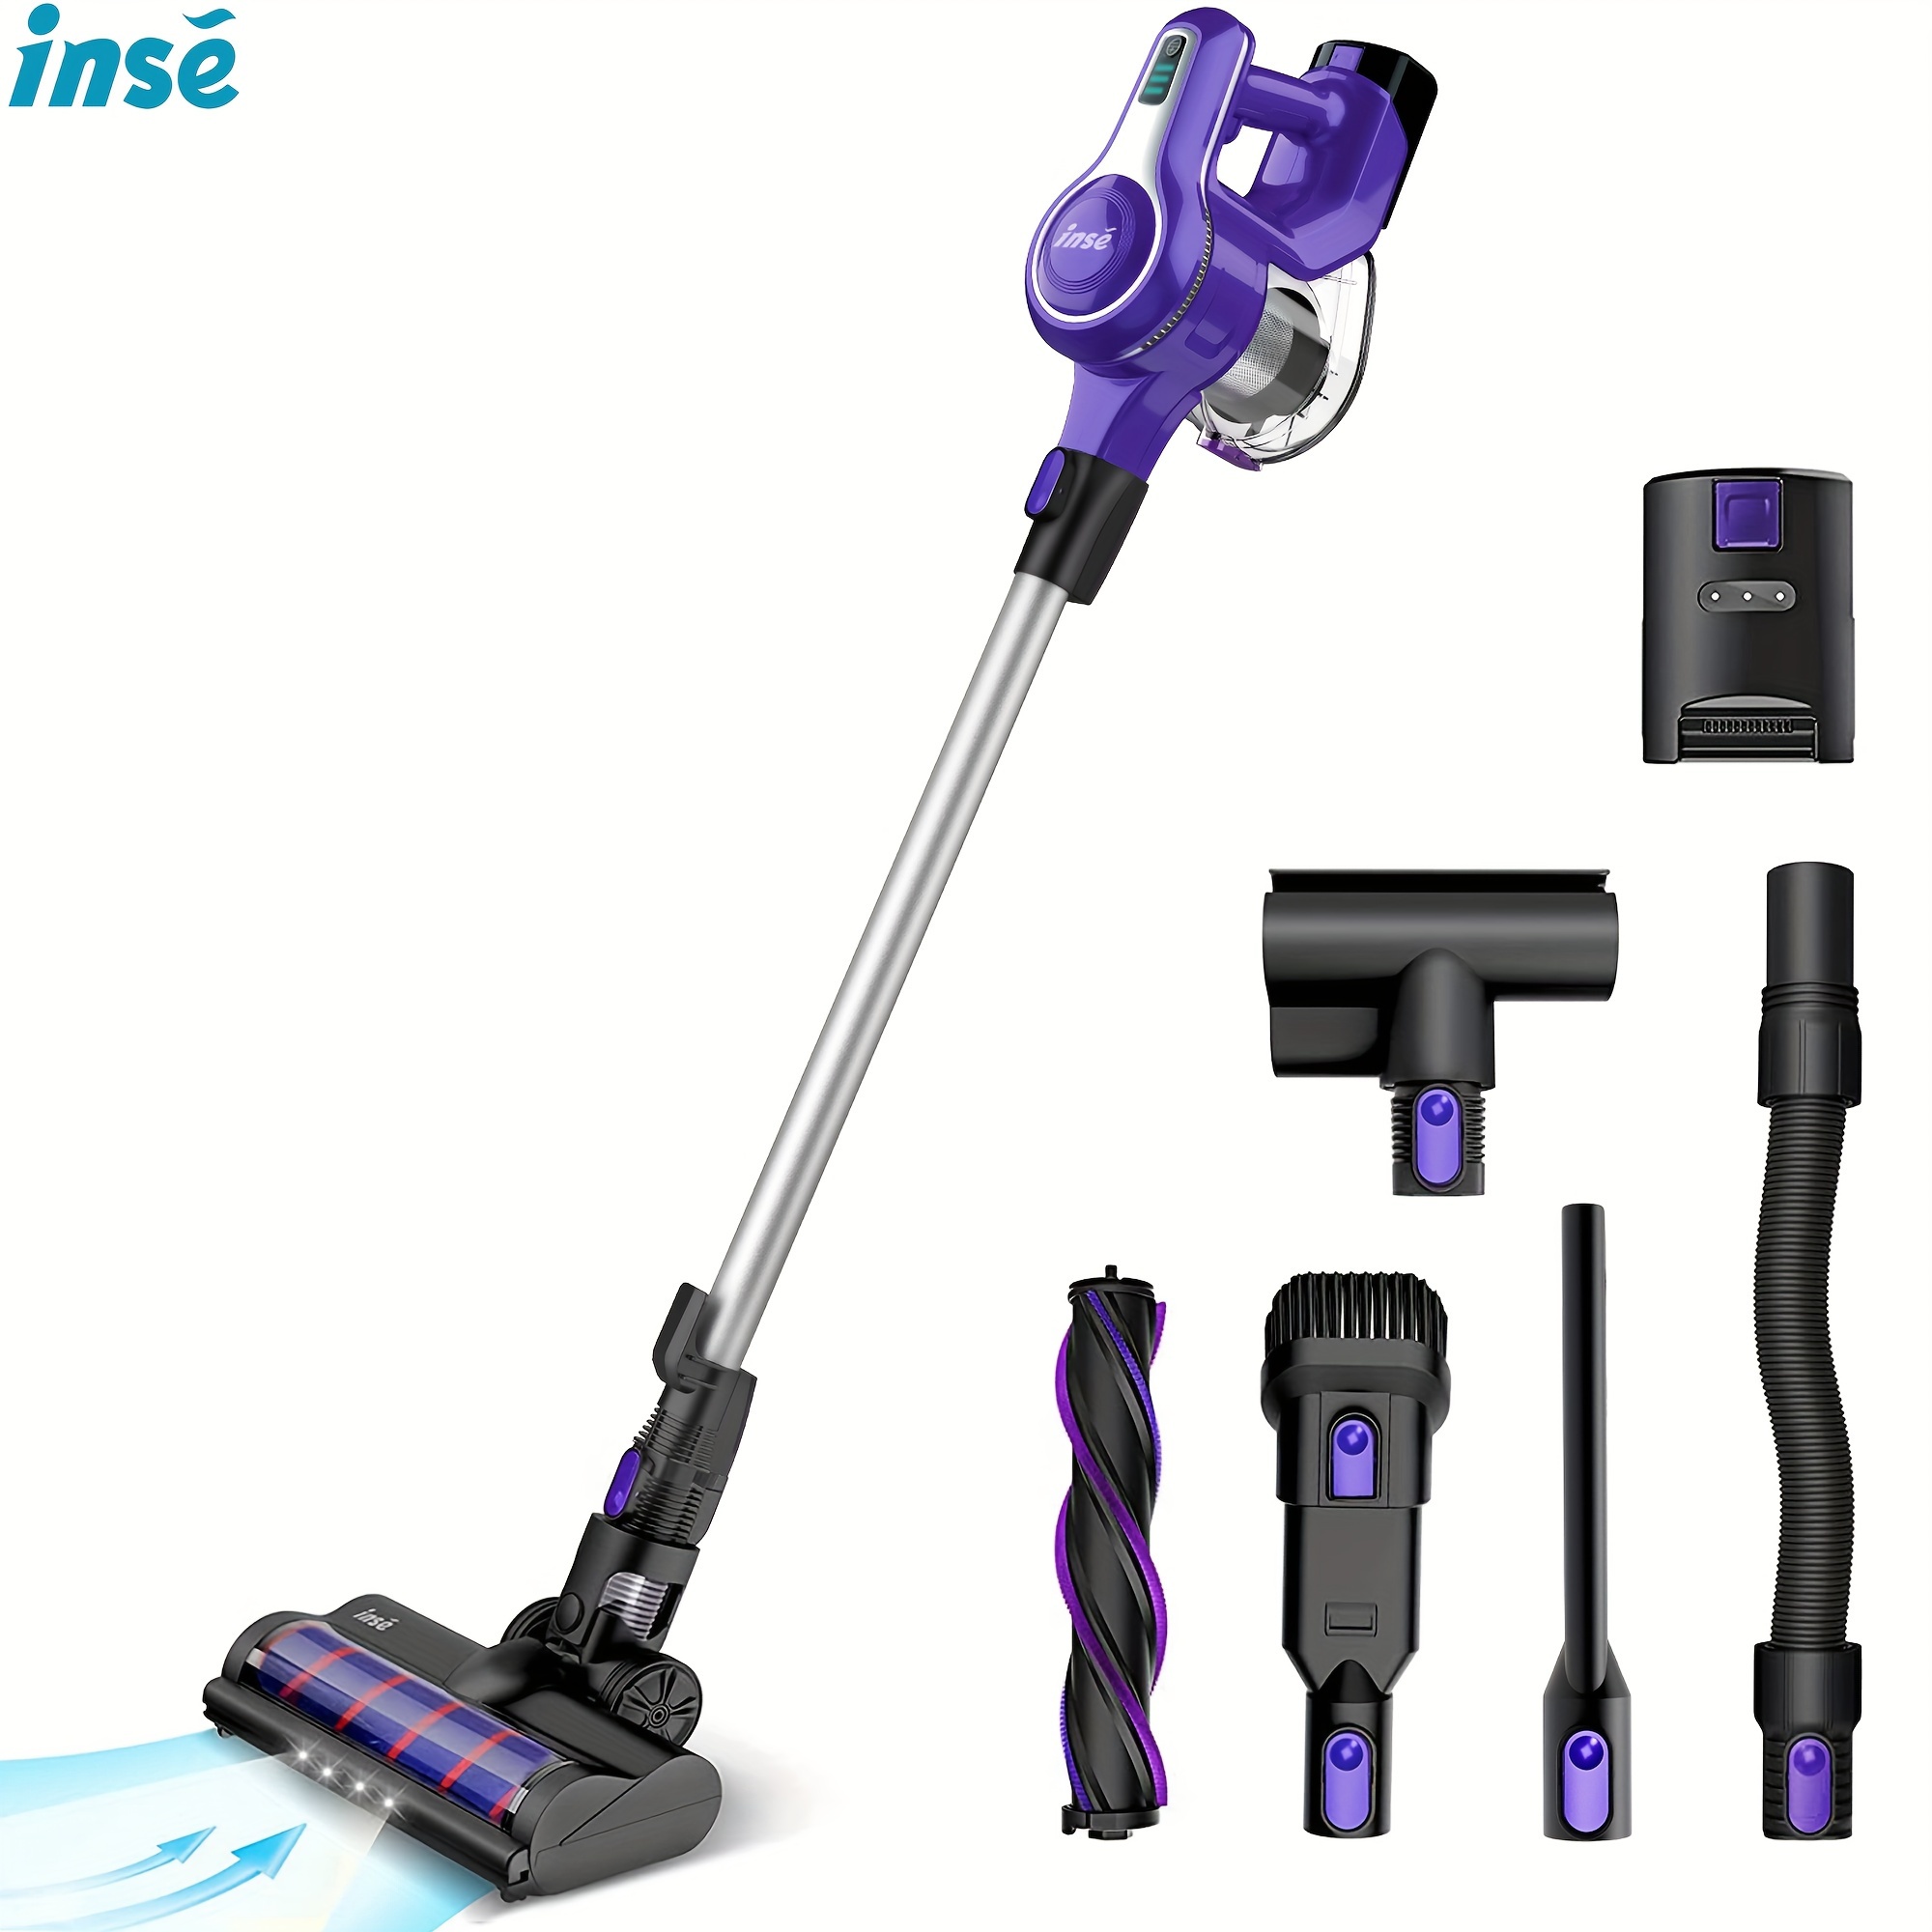 

S6x Cordless Vacuum Cleaner, 30kpa 250w Brushless Motor Stick Vacuum, Up To 45 Mins Runtime 2500mah Rechargeable Battery, For Carpet Hard Floor Pet Hair